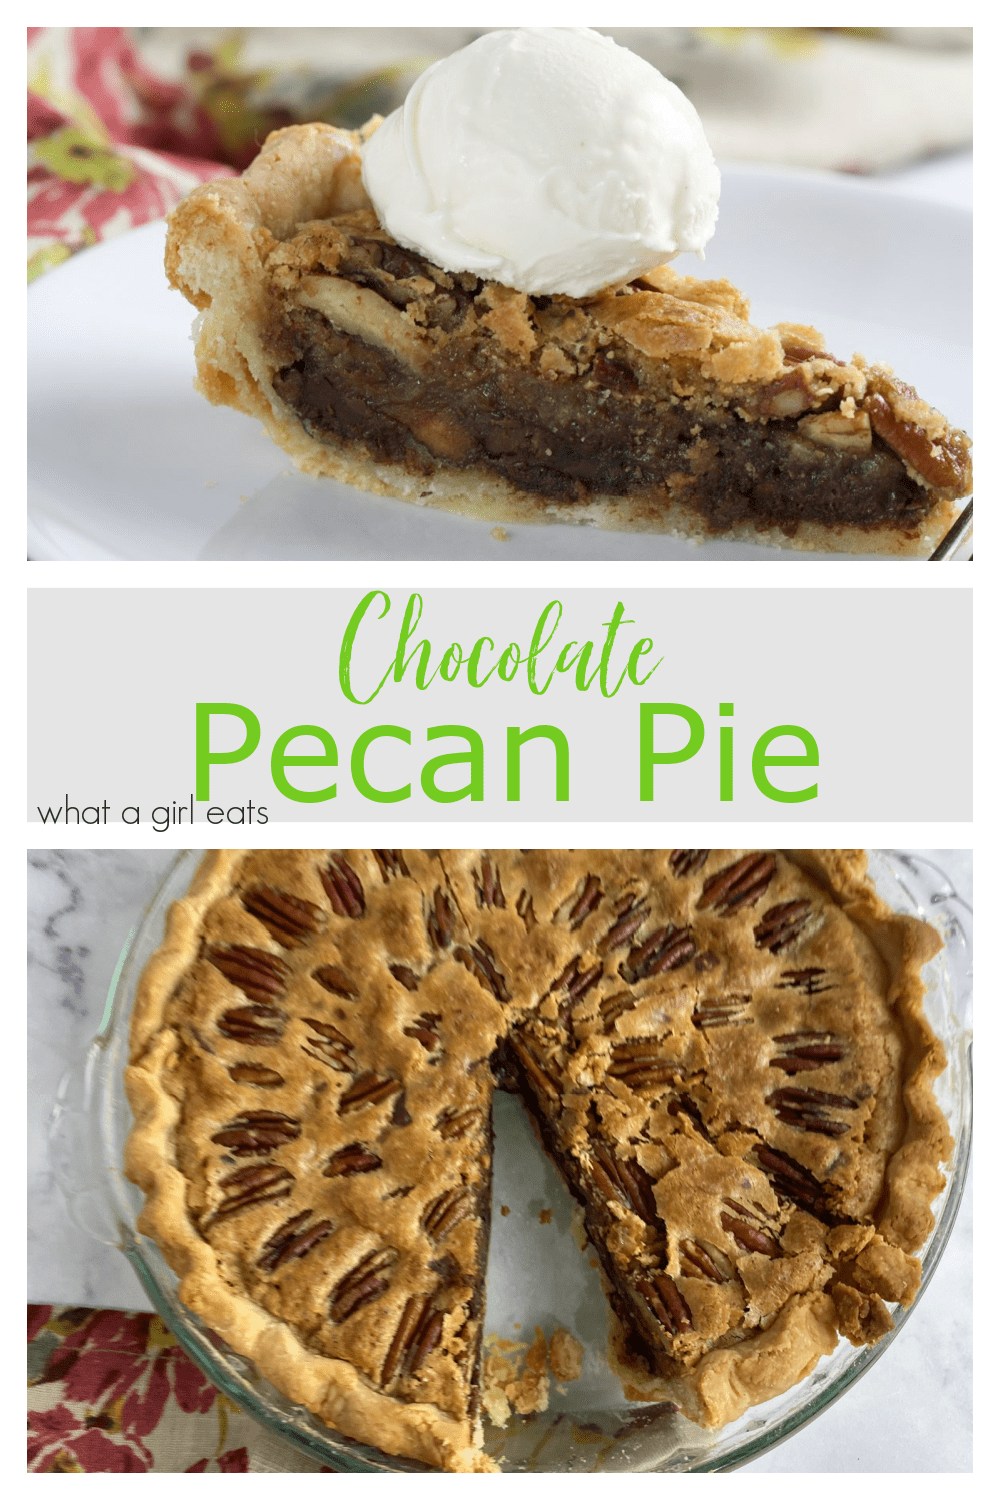 Chocolate pecan pie is a delicious twist on traditional pecan pie recipe. With a tender pie crust, chunks of bittersweet and semi-sweet chocolate added to the gooey filling, this decadent dessert is a chocolate and nut lover's dream.